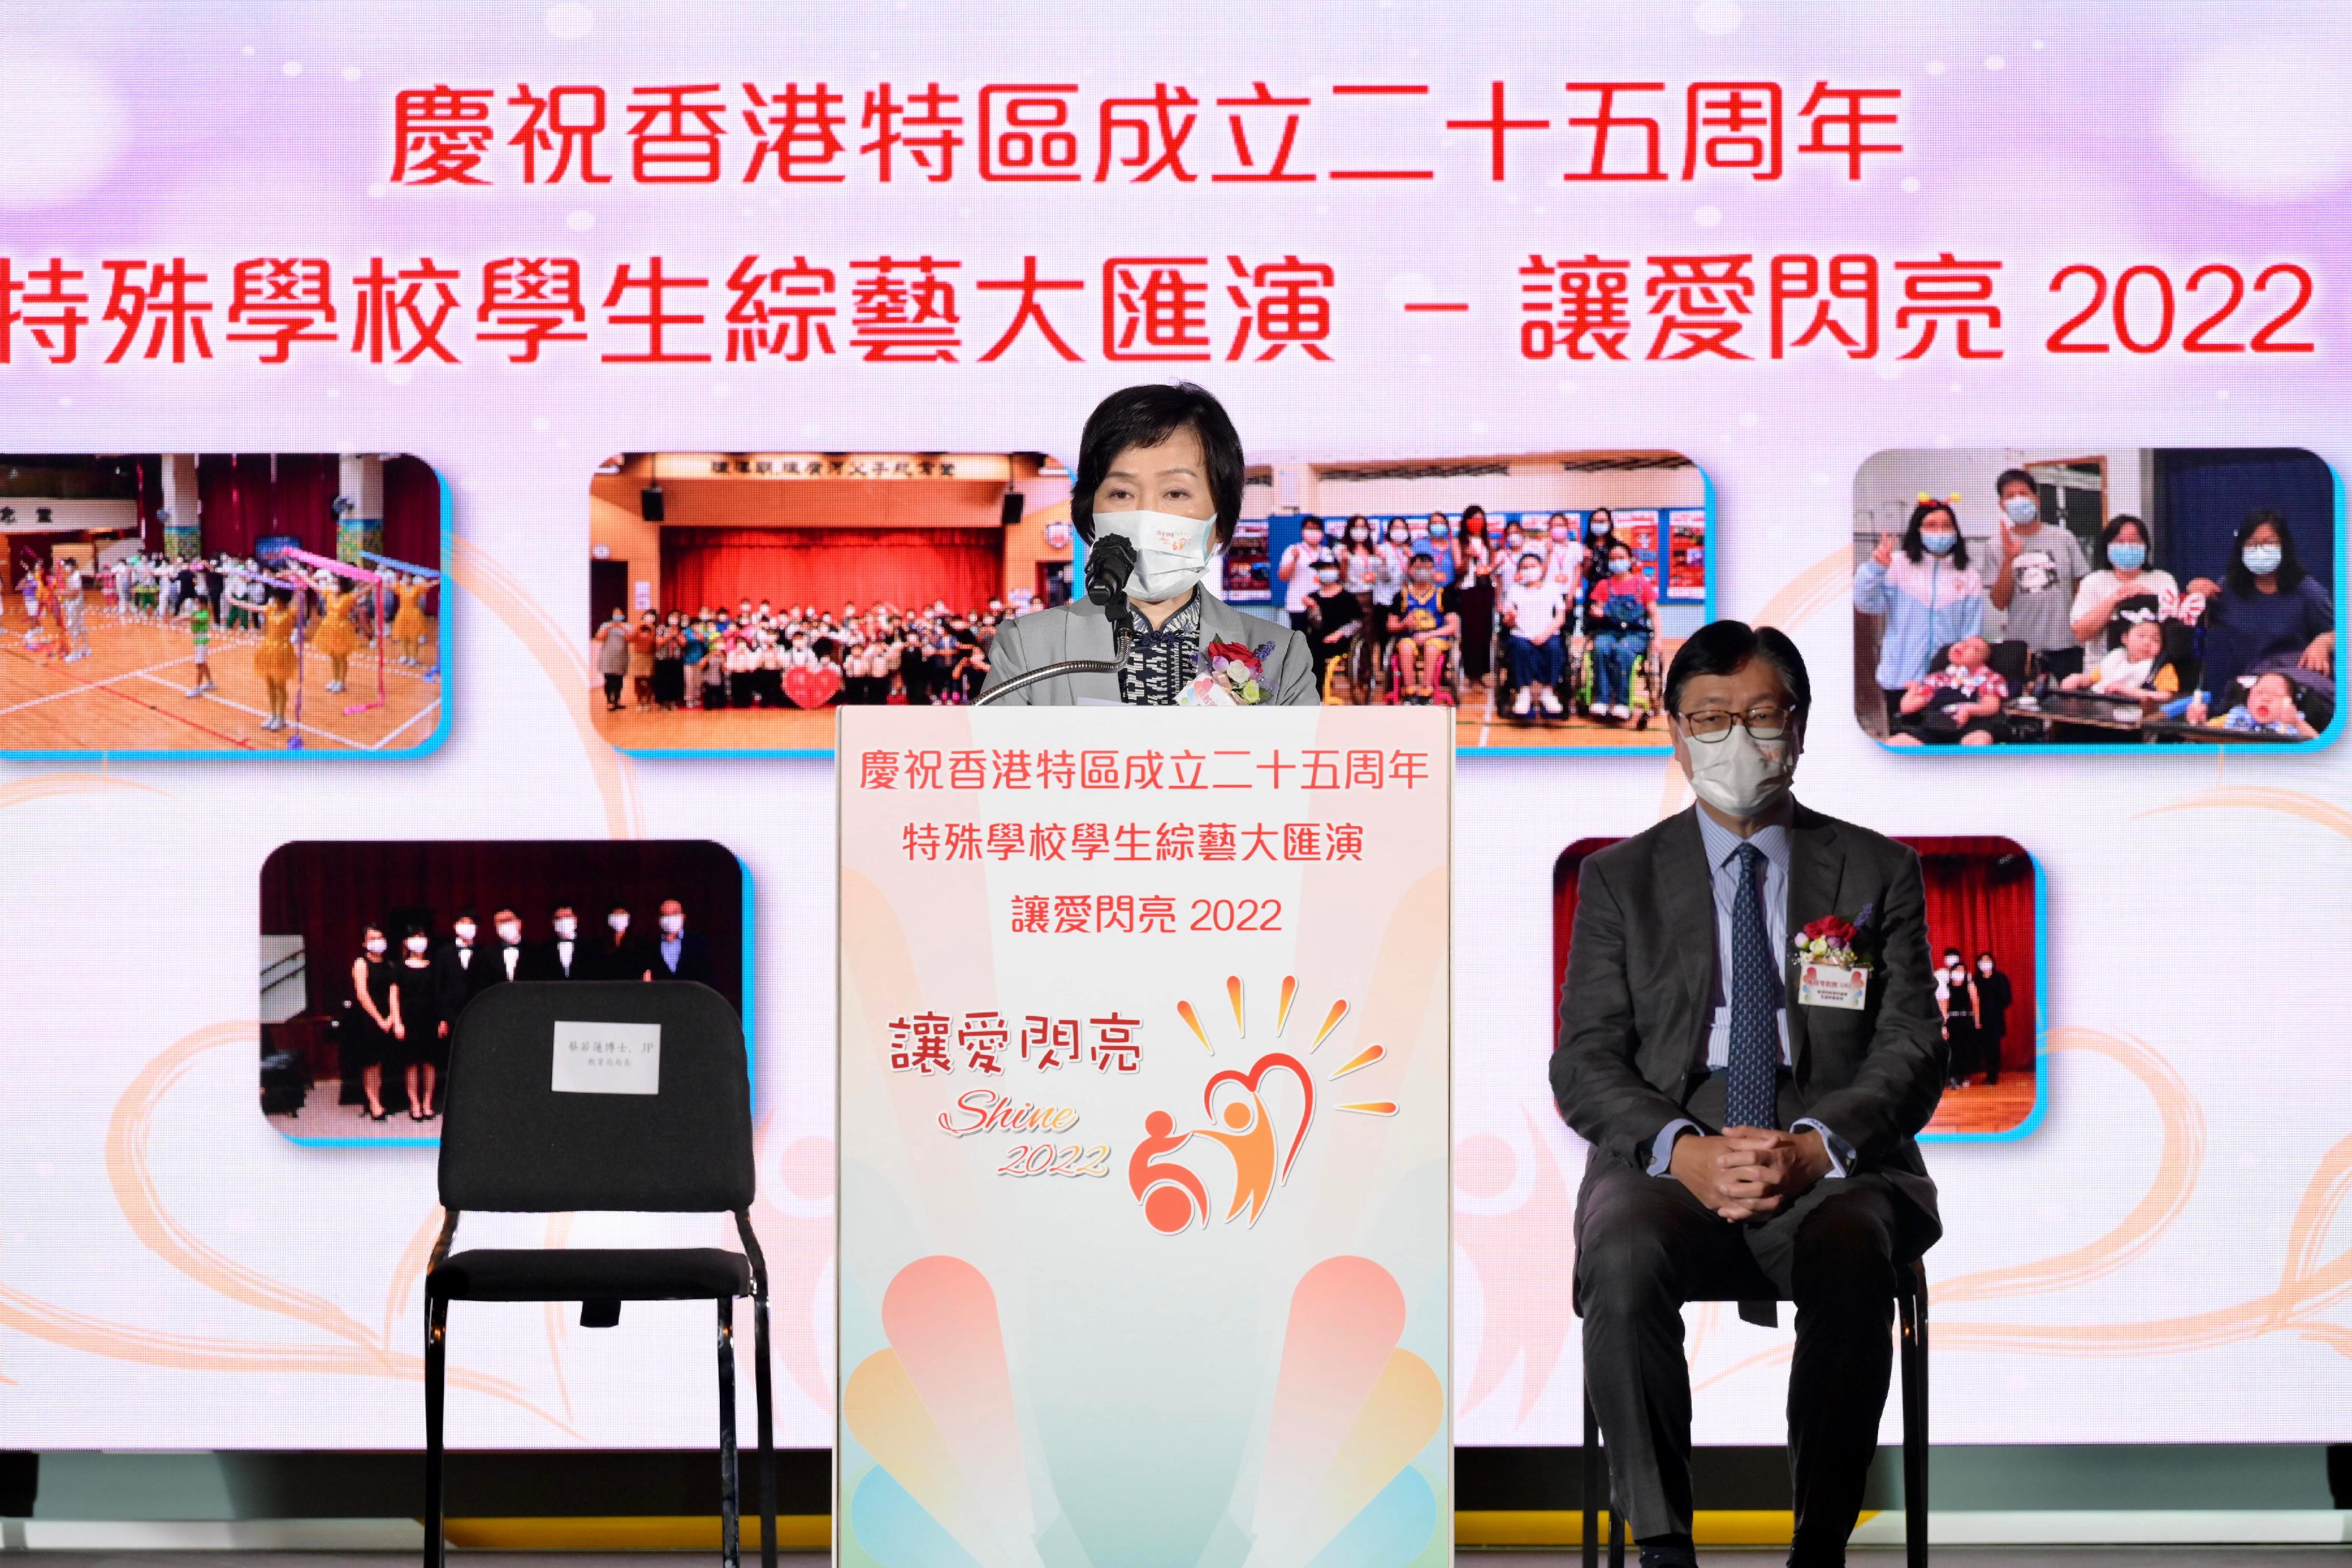 The Secretary for Education, Dr Choi Yuk-lin, delivered a speech at the "Variety Show of Special School Students - Let Your Love Shine 2022" today (August 11).